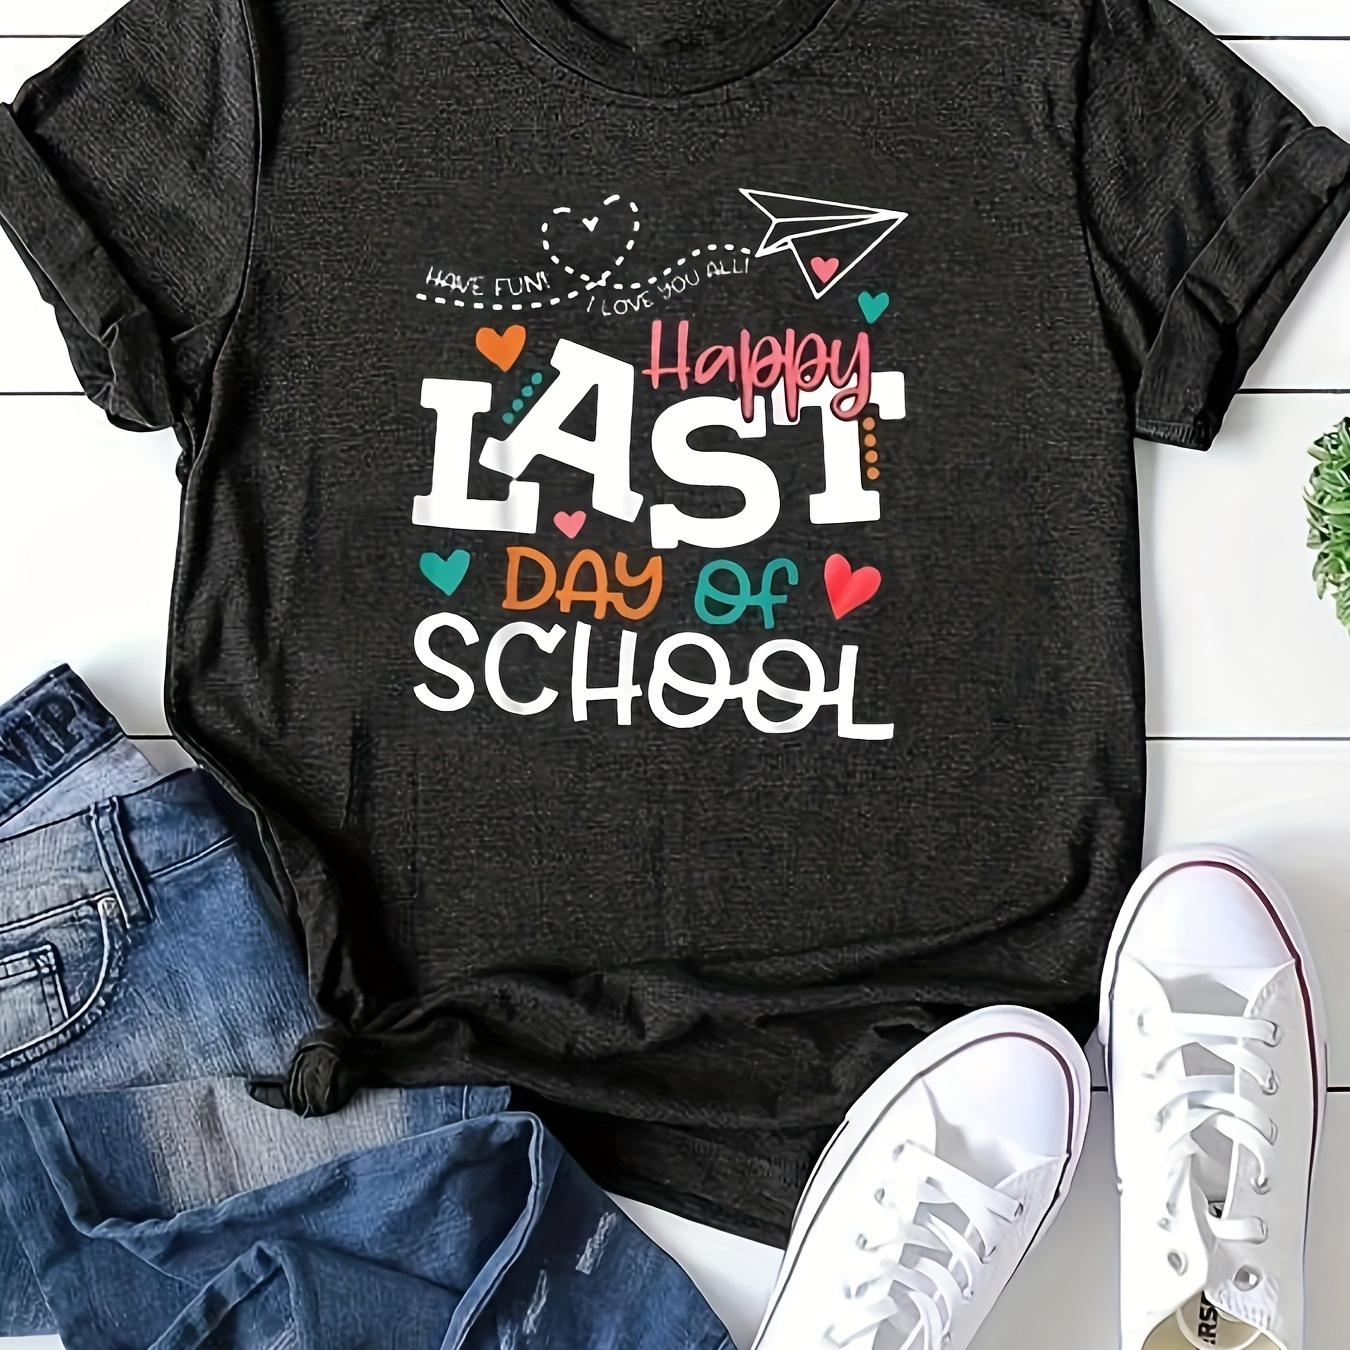 

Happy Last Day Of School Print T-shirt, Casual Crew Neck Short Sleeve Top For Spring & Summer, Women's Clothing